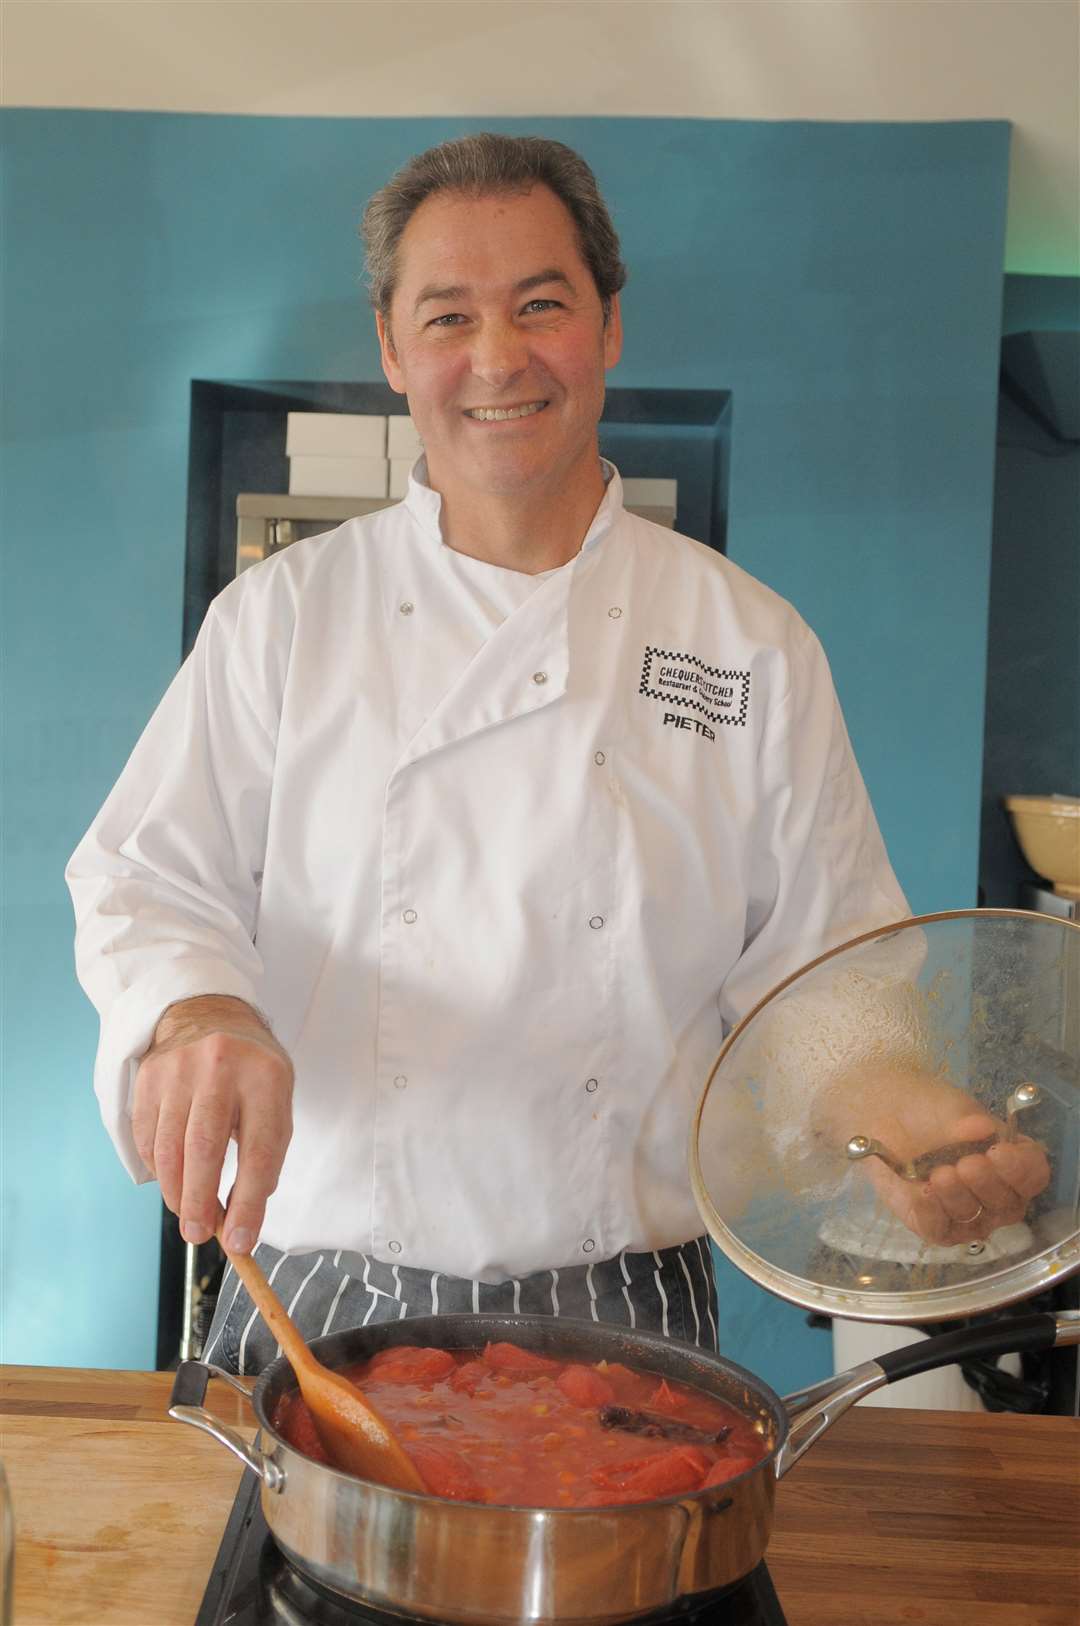 Pieter van Zyl gives a cookery demonstration